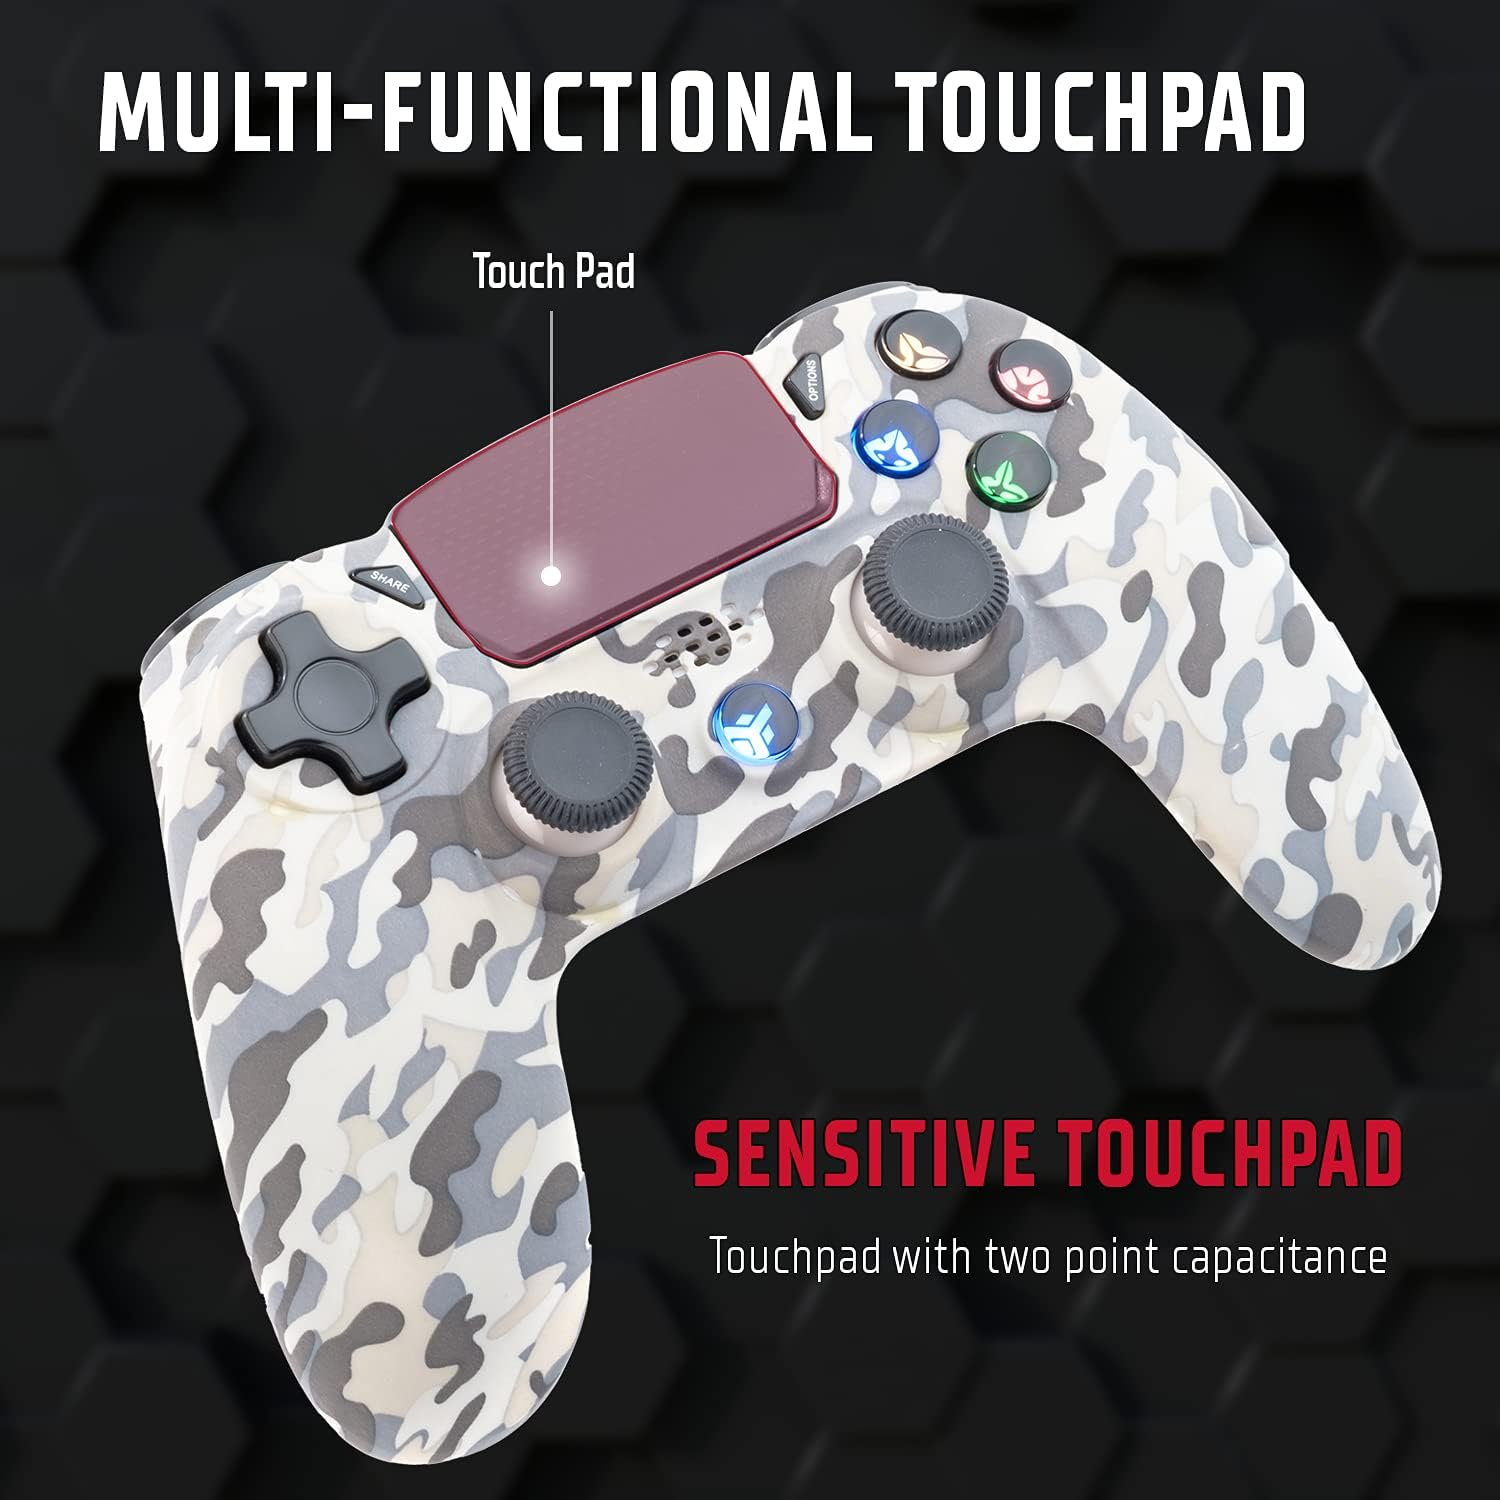 GAMEPAD CONTROLLER PC, PS4, Bluetooth, DualShock, Progr Keys, TouchPad Axis6, CAMO WHITE 